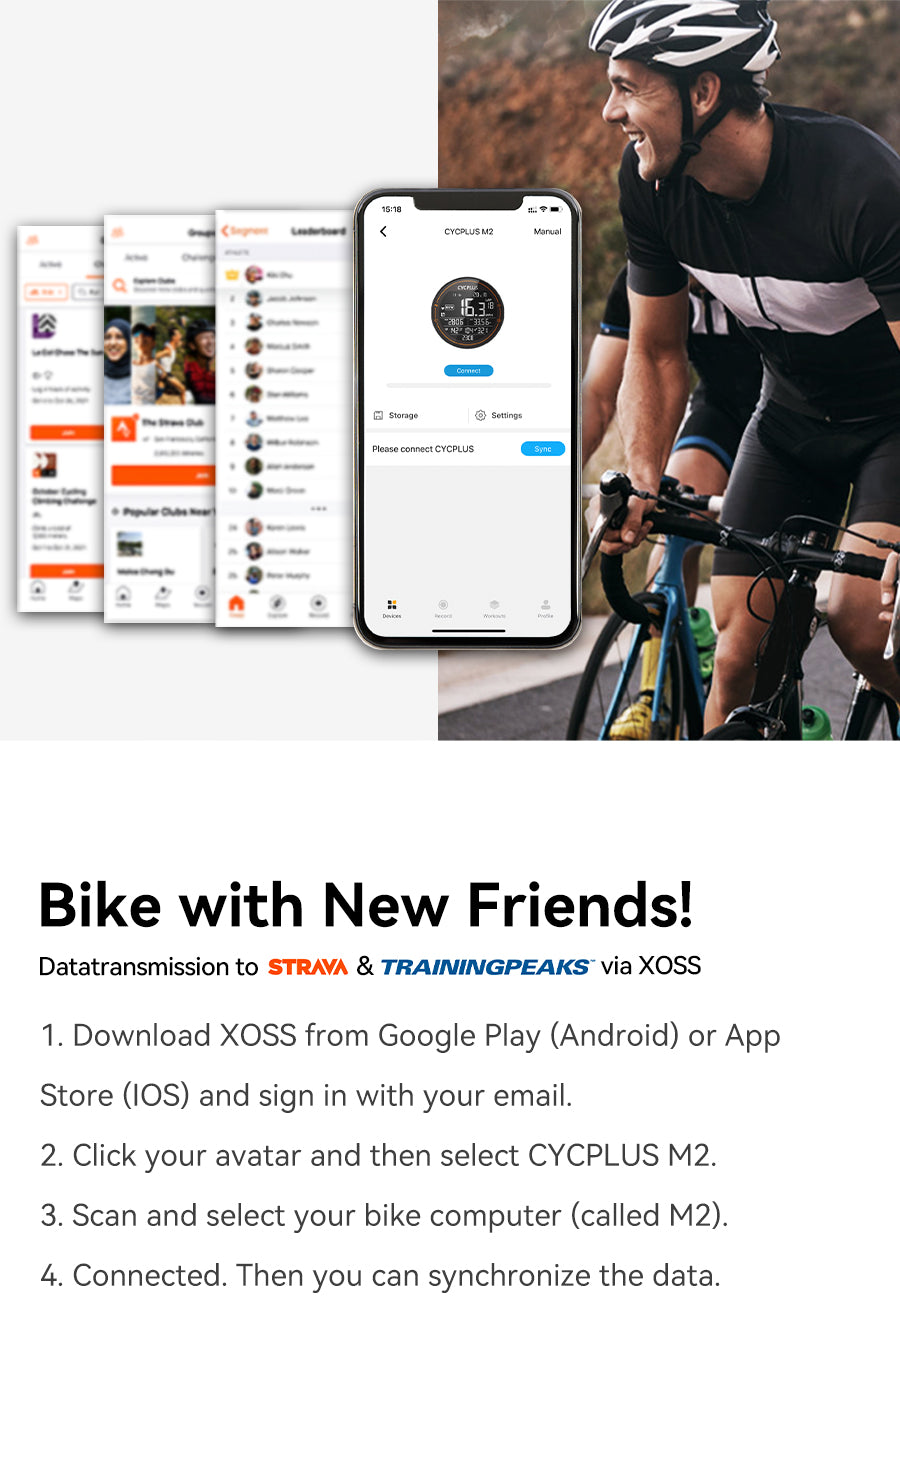 BIKE WITHNEW FRIENDS!Datatransmission to STRAVA & TRAININGPEAKS via XOSS 1.Download XOSS from Google Play (Android) or App Store (IOS)and sign in with your email. 2.Click your avatar and then select CYCPLUS M23.Scan and select your bike computer (called M2)4.Connected. Then you can synchronize the data.